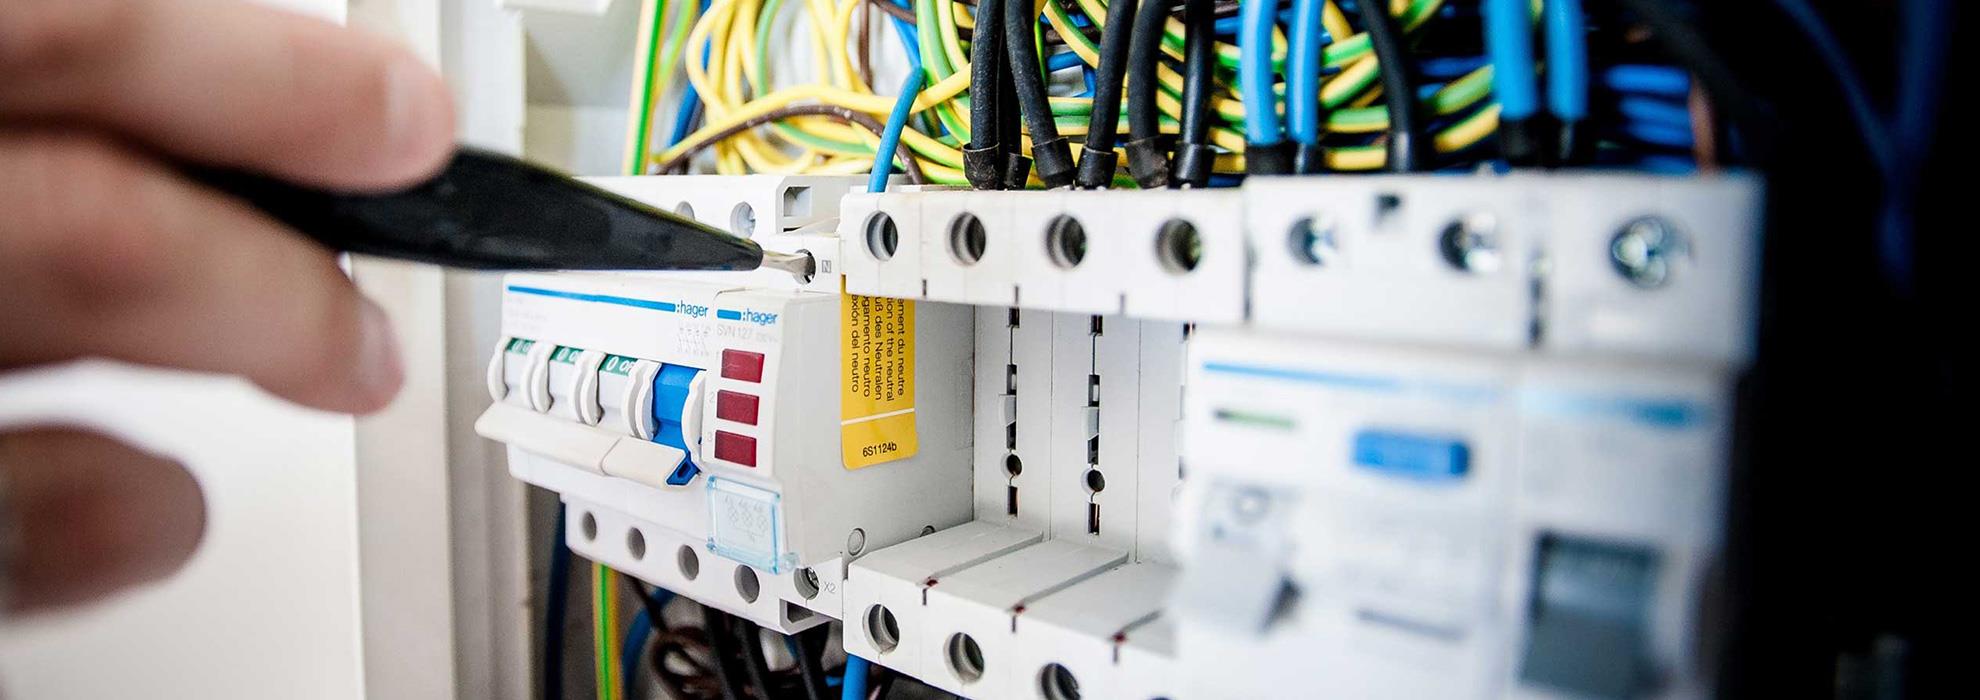 you need an expert and experienced electrician who can cheaply and properly repair all electrical faults